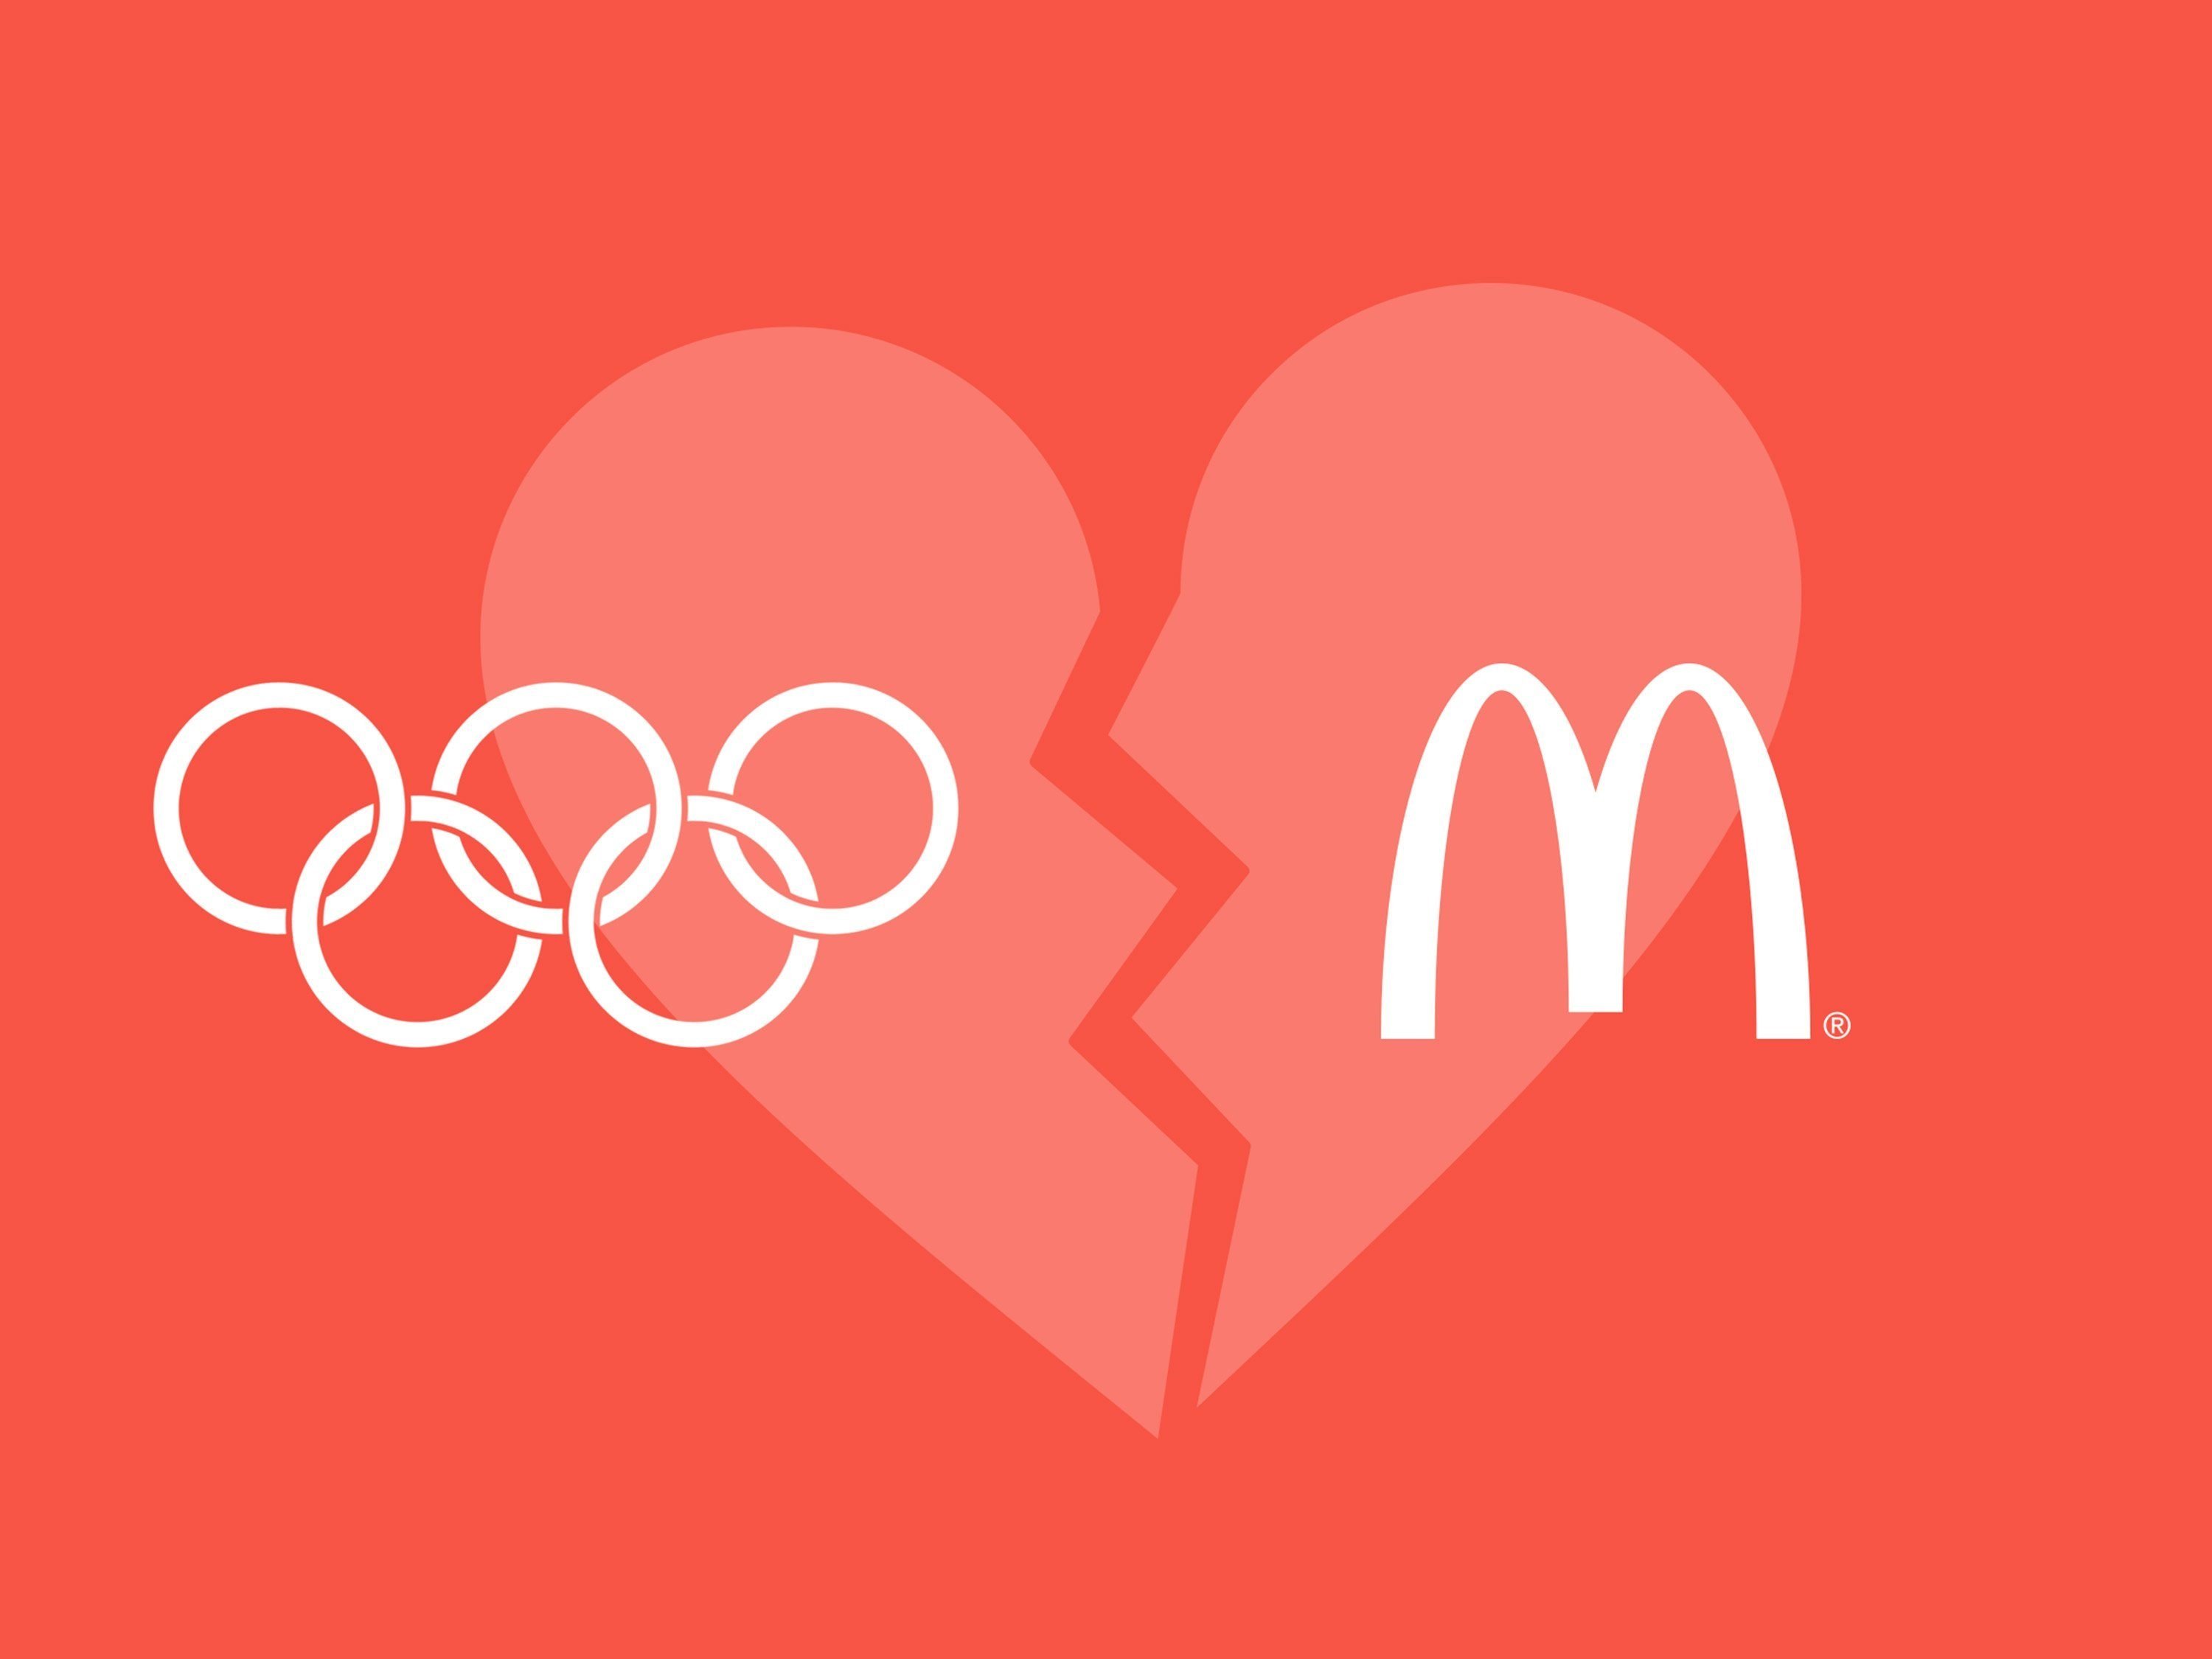 Why sponsors are breaking up with the Olympics